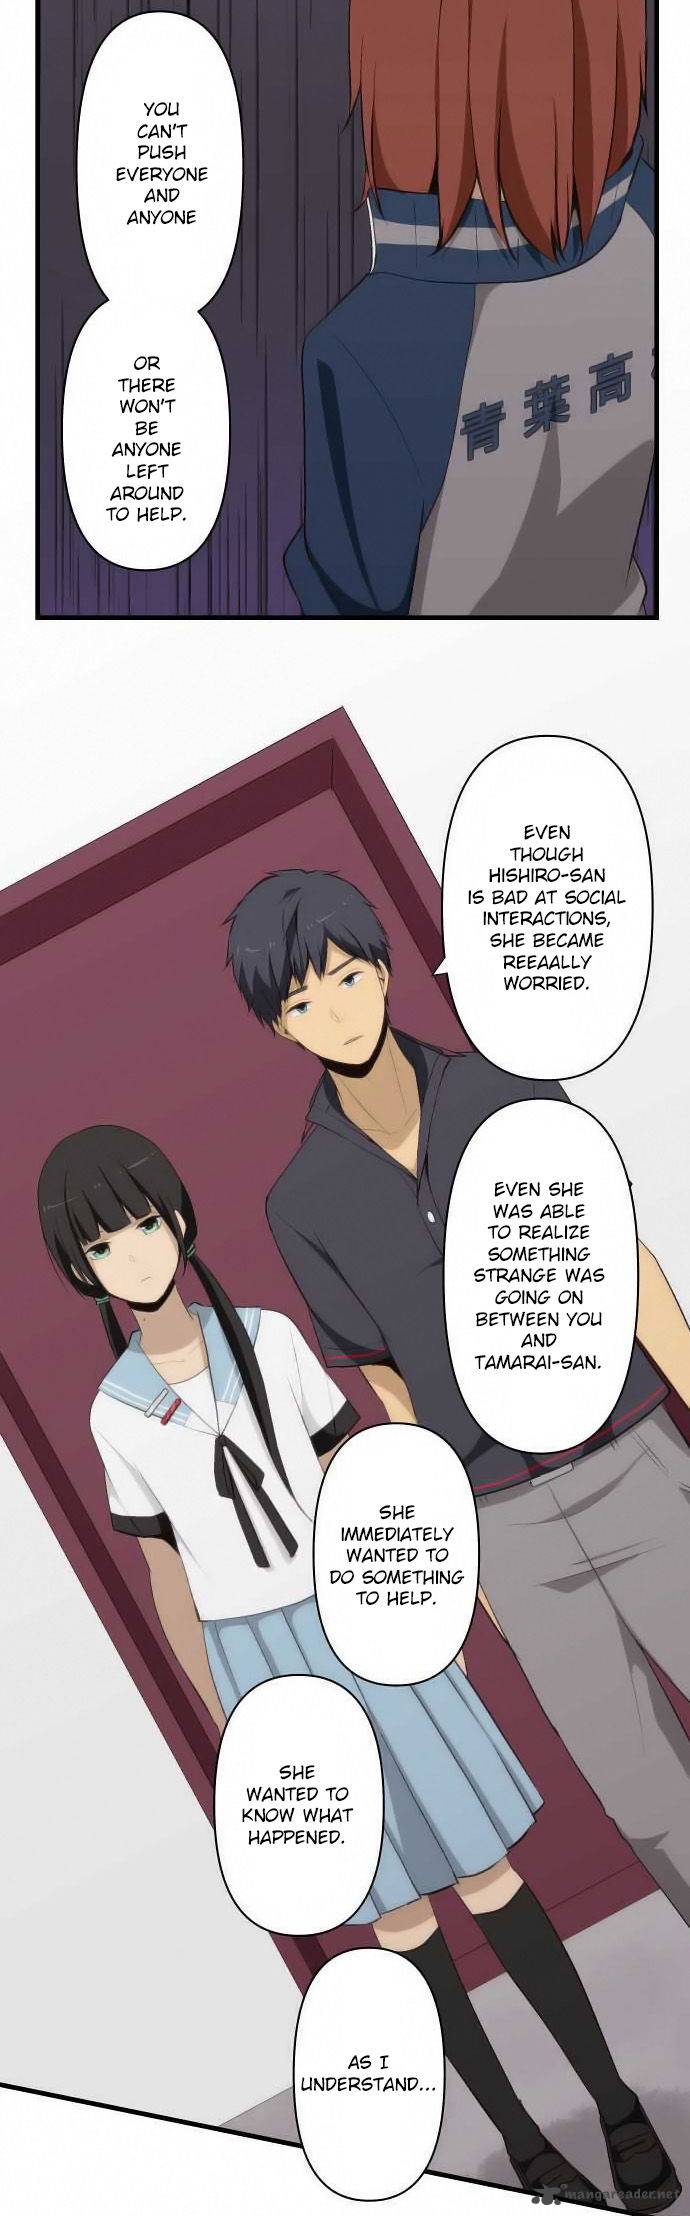 relife_80_16